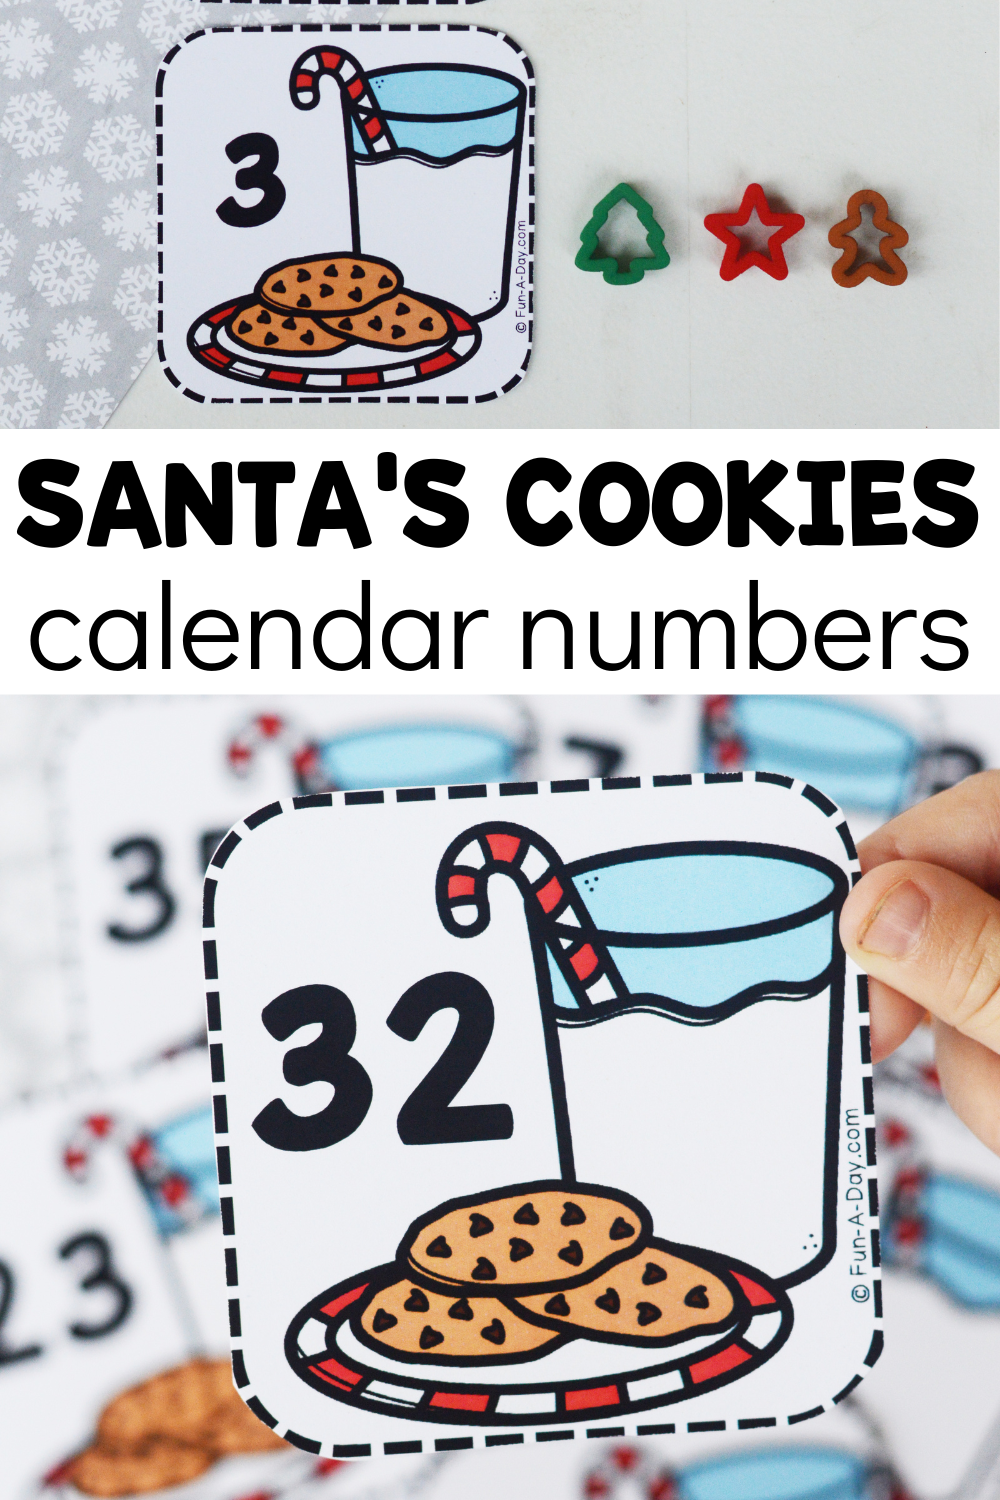 Number 32 Milk and cookies calendar numbers with other calendar numbers splayed out in the background. One activity idea for the calendar numbers. Text that reads Santa's cookies calendar numbers.